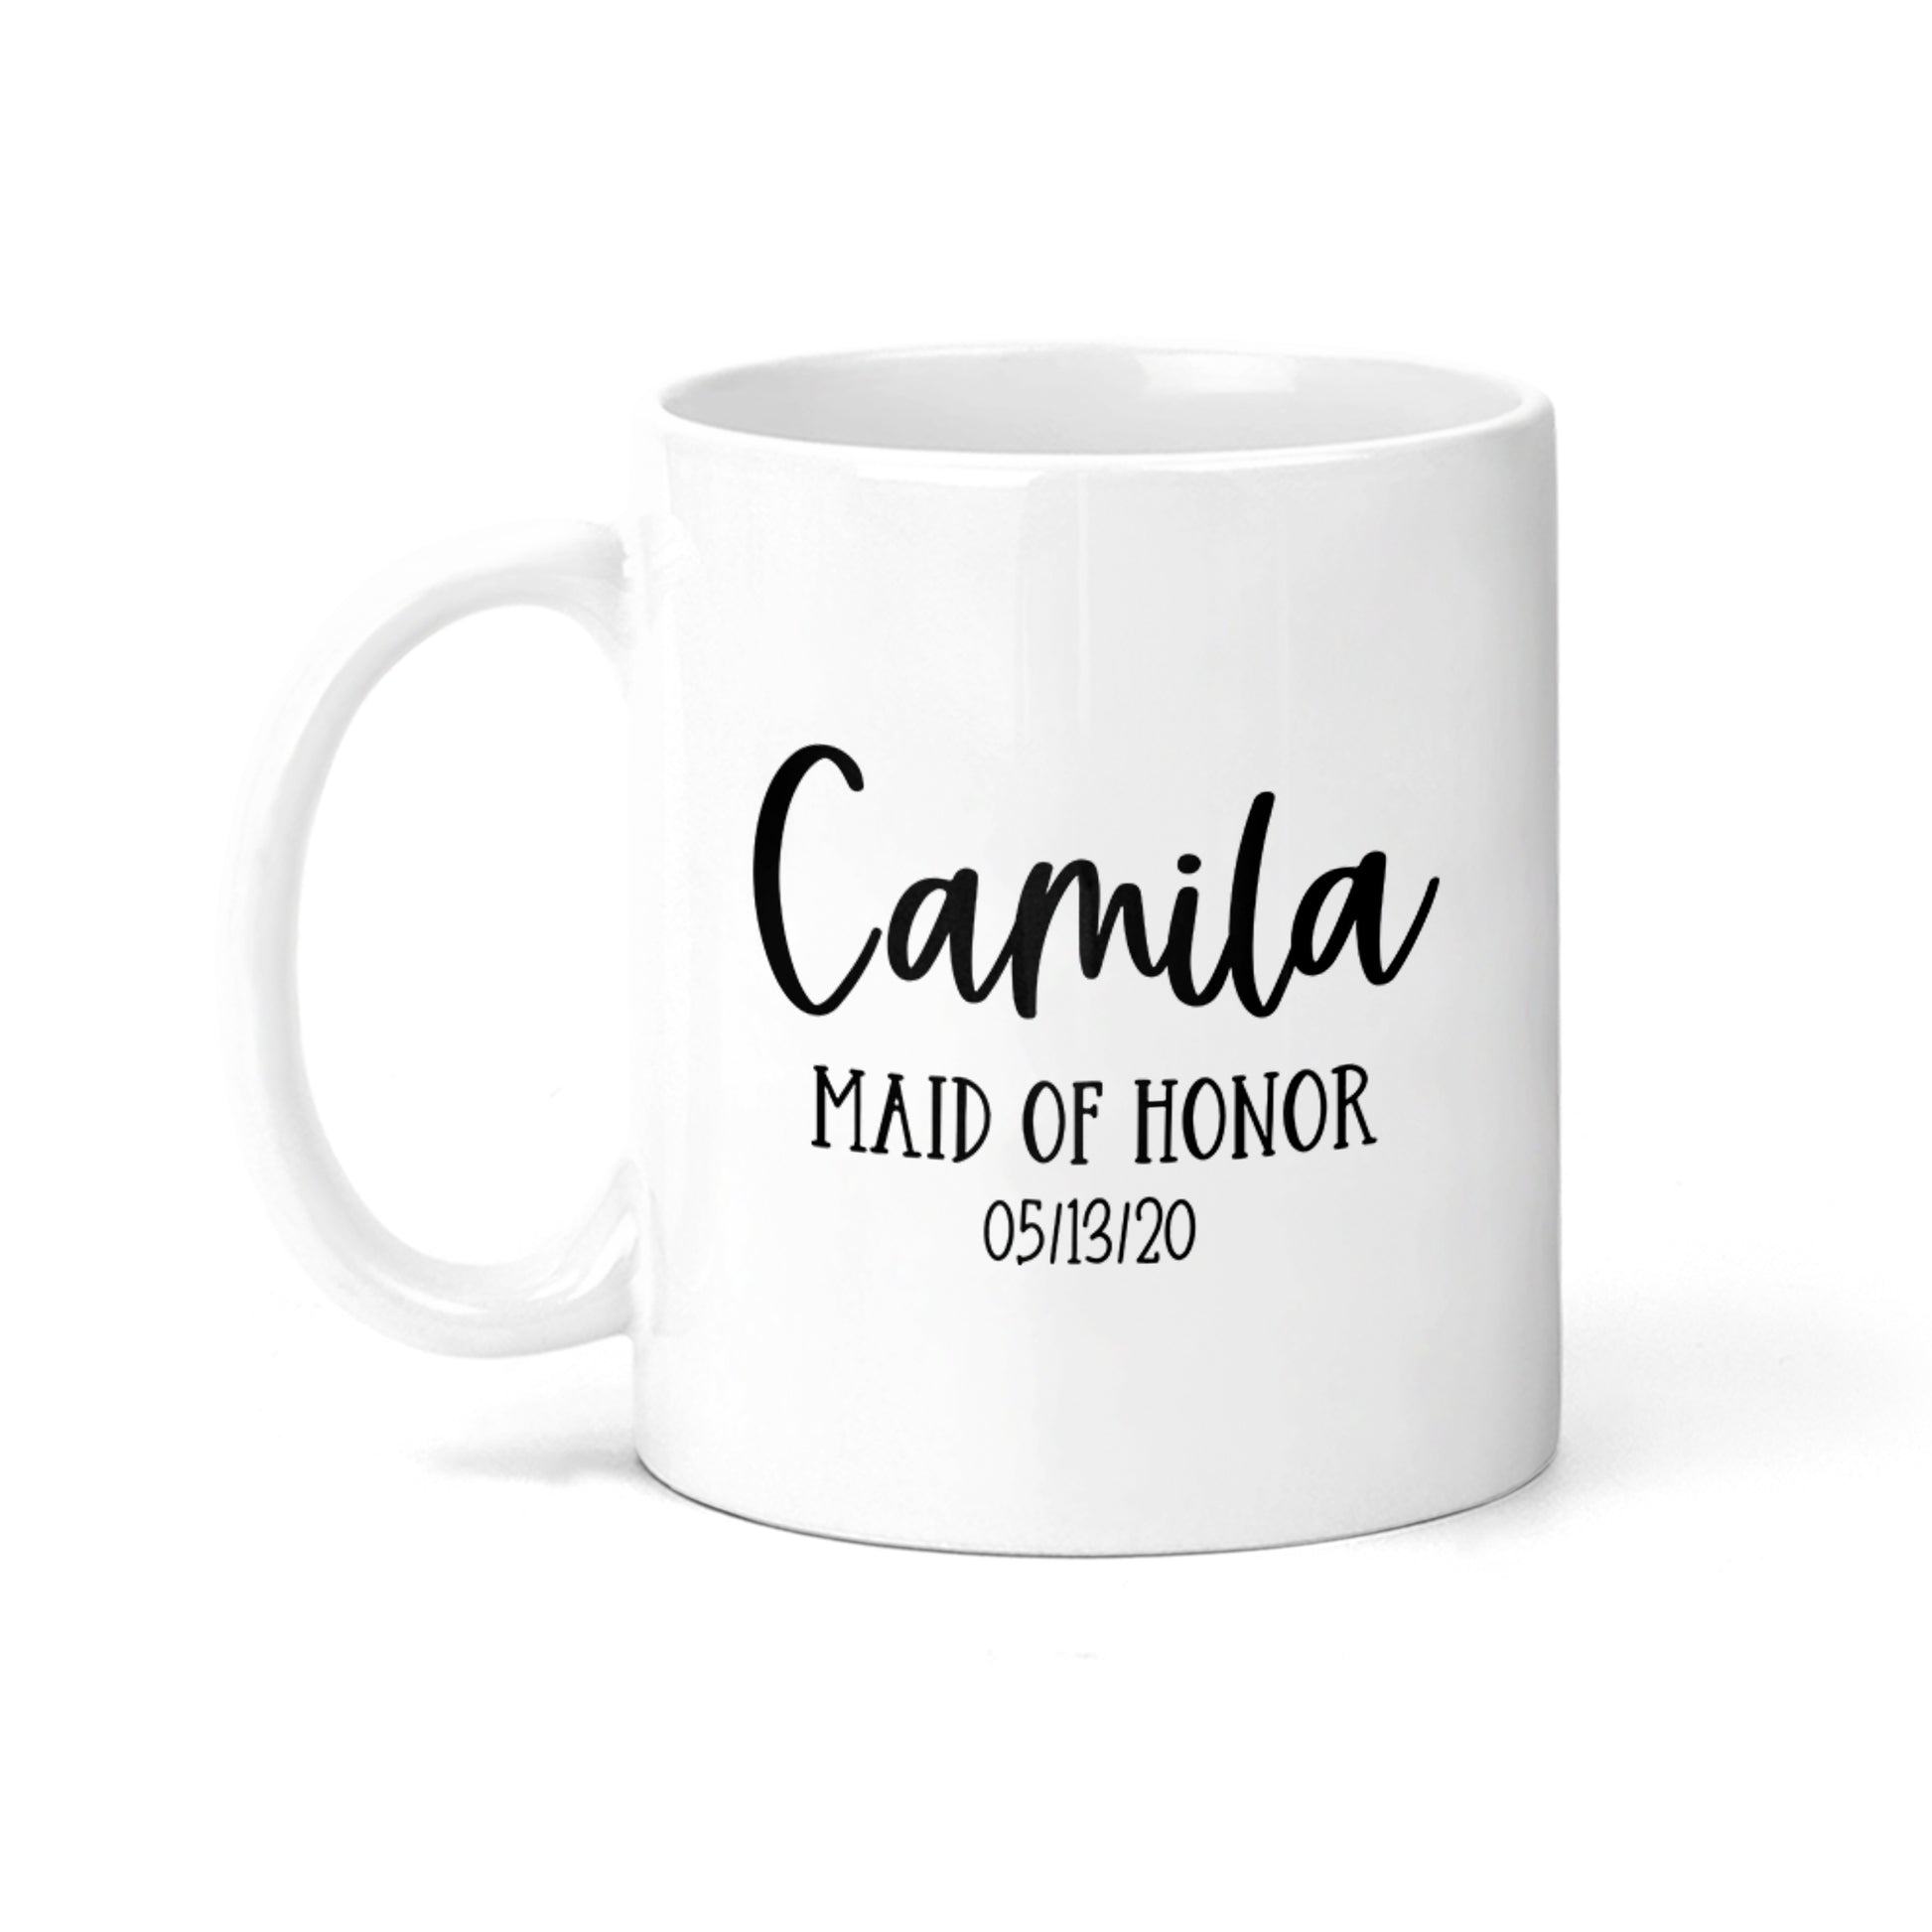 Personalized Maid of Honor with Date Coffee Mug - M0539